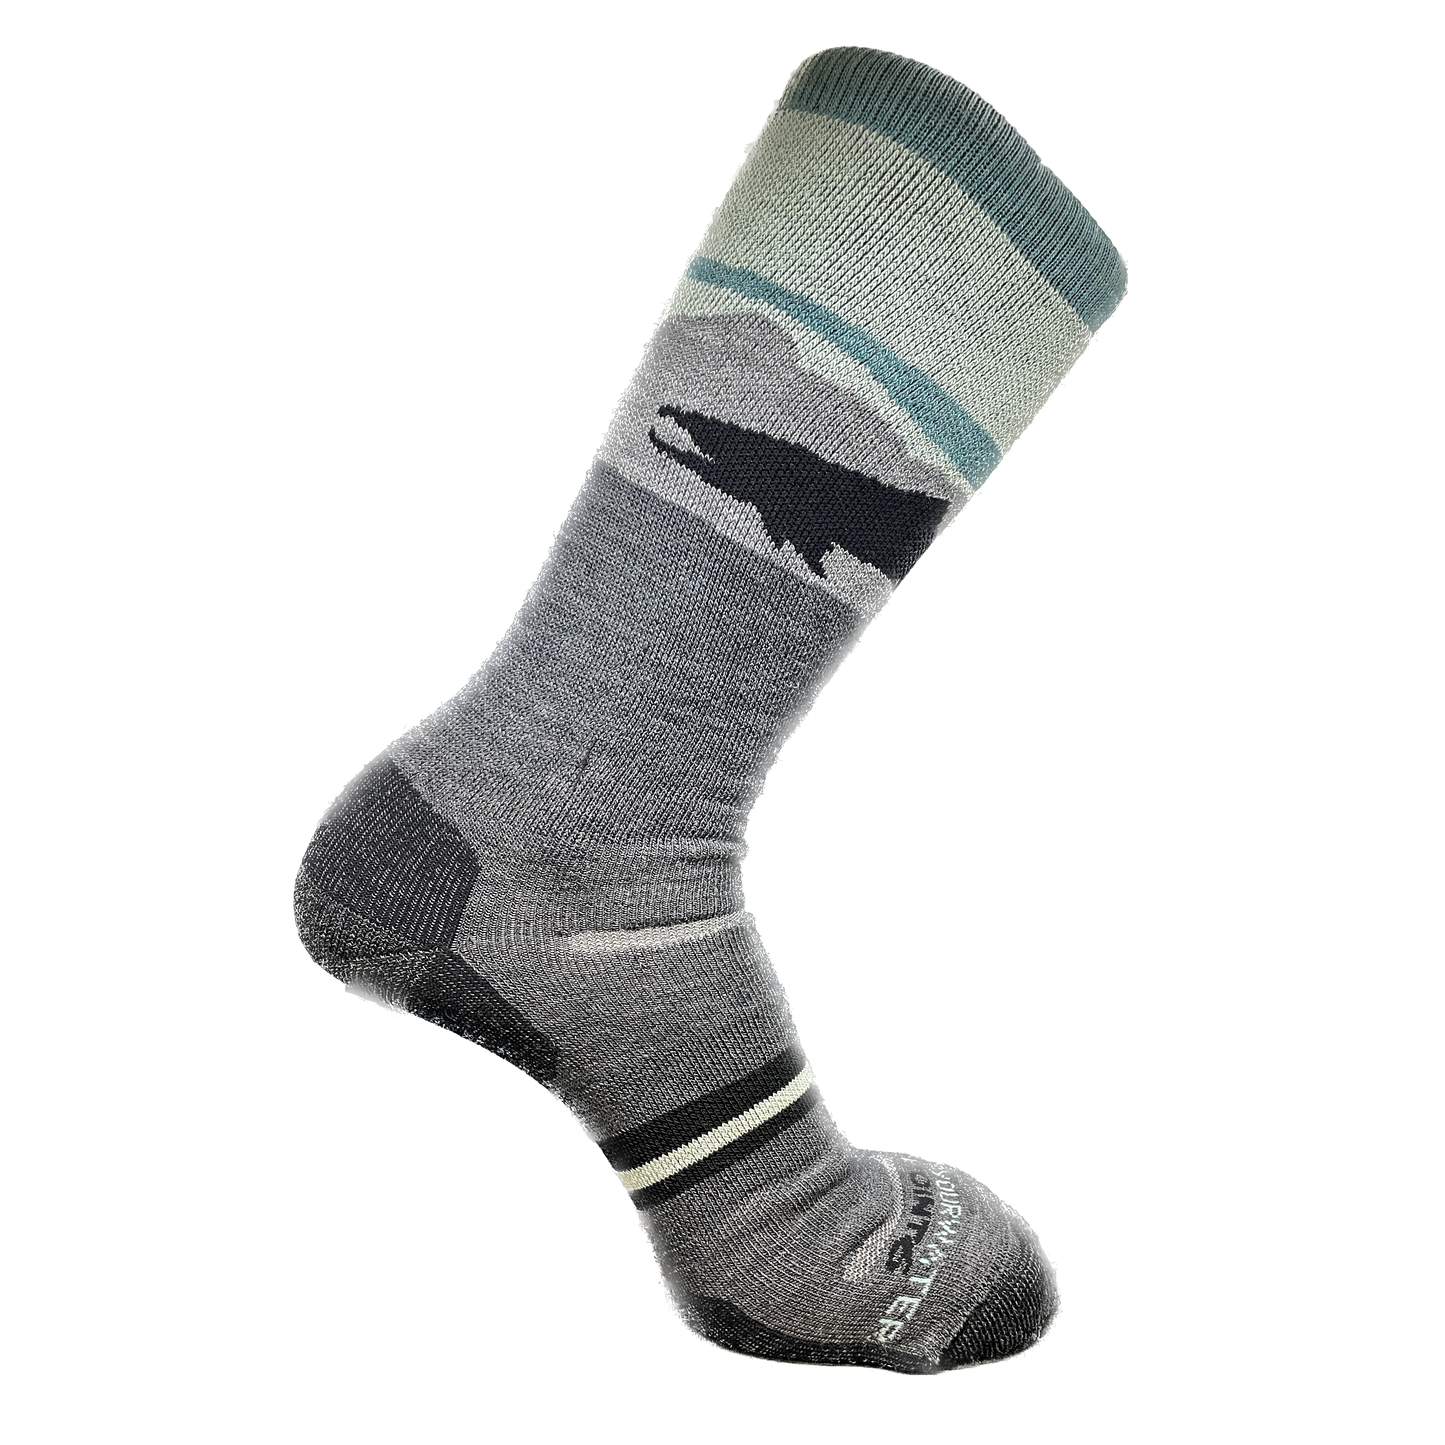 light gray/blue socks with a mountain range and trout silhouette